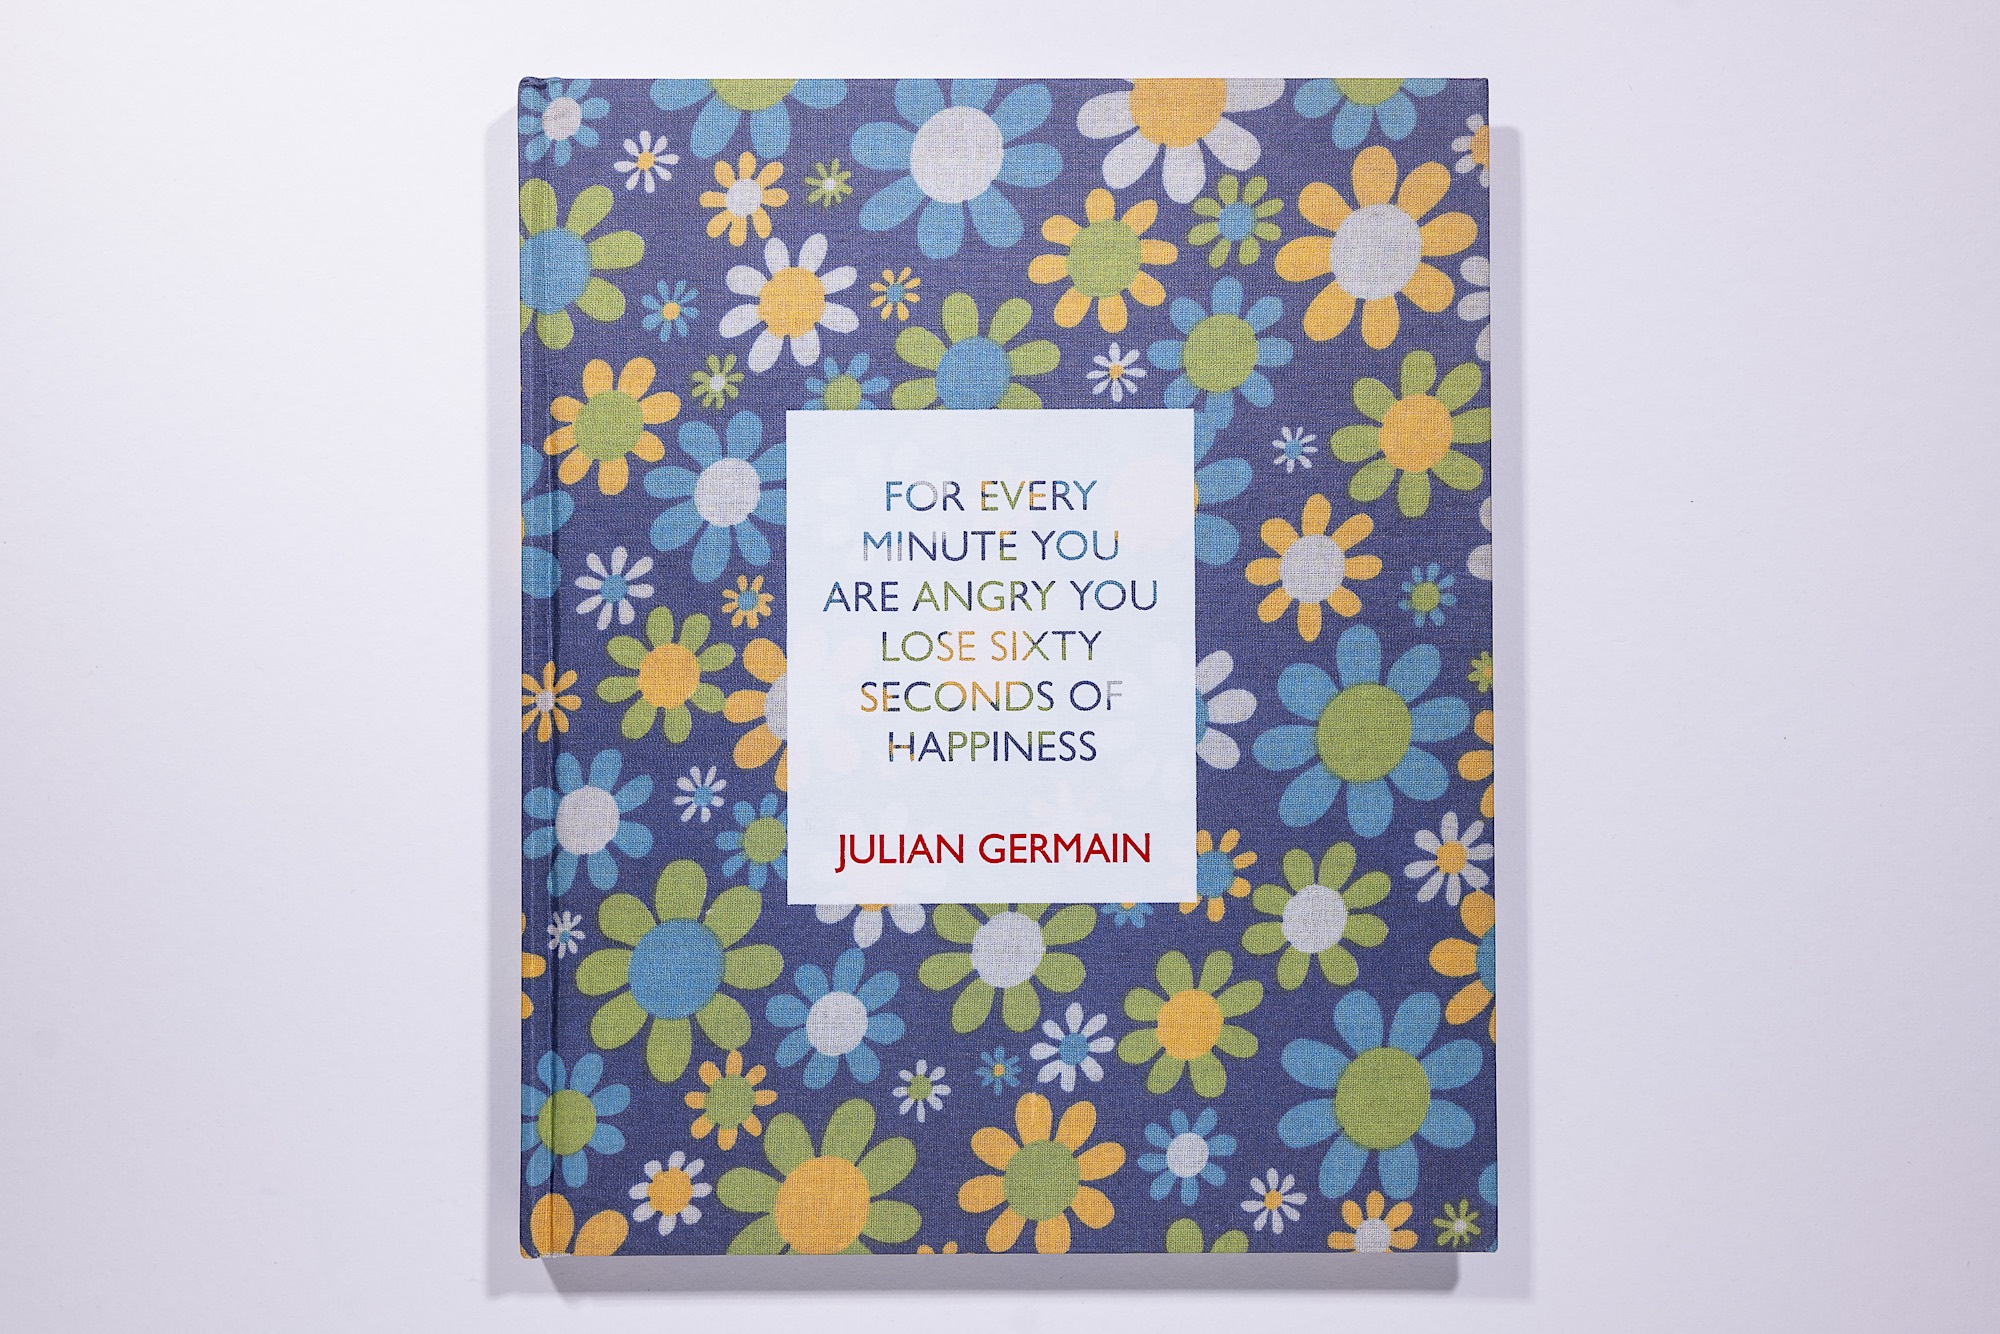 Julian Germain - For Every Minute You Are Angry You Lose Sixty Seconds of Happiness (Third Edition)